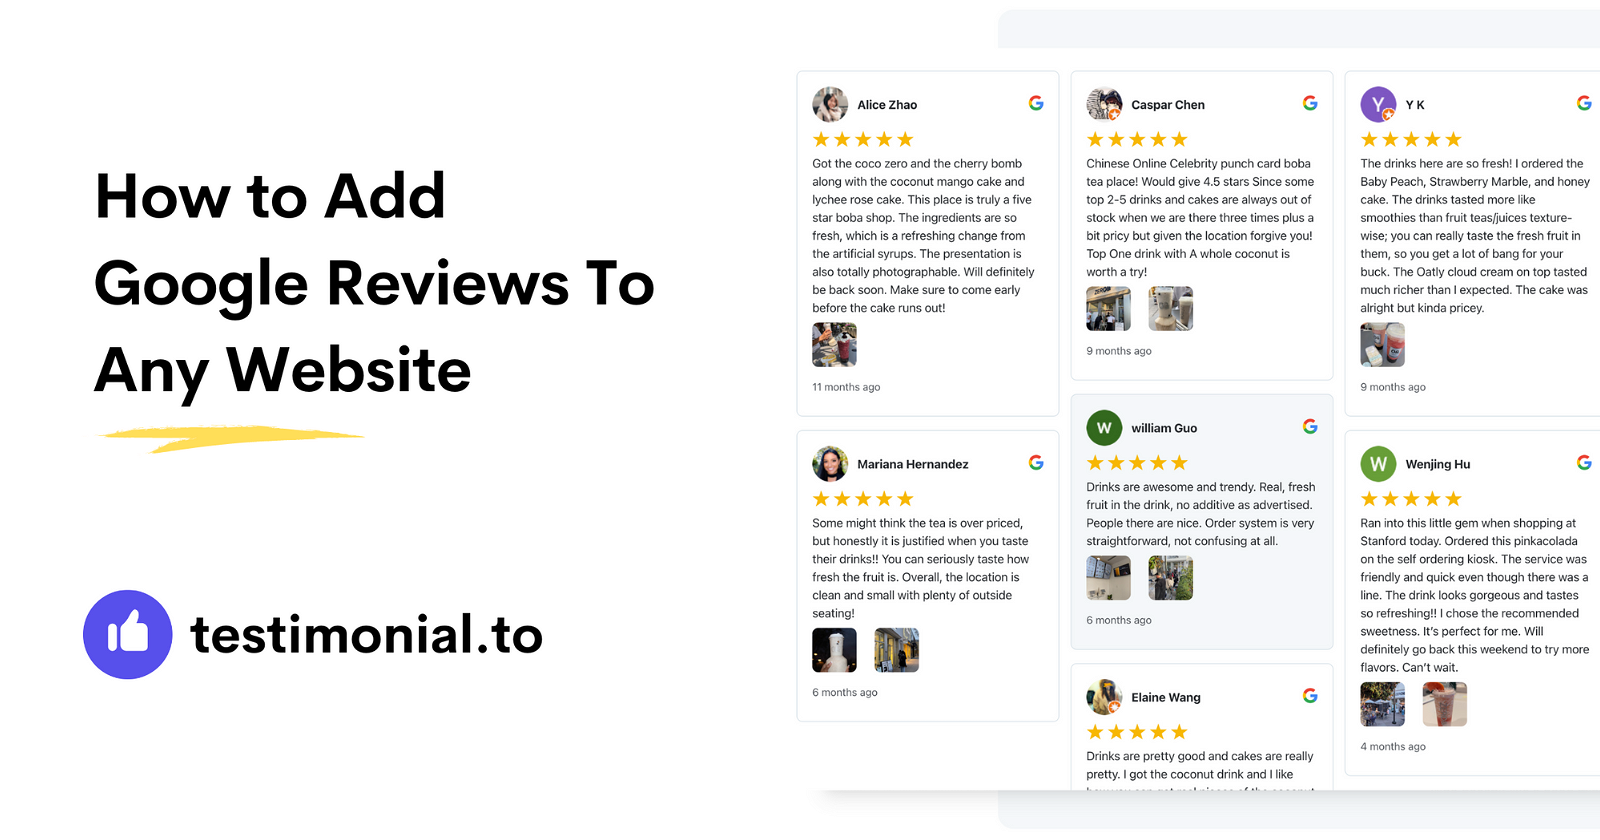 How to Add Google Reviews To Any Website (6 Methods)